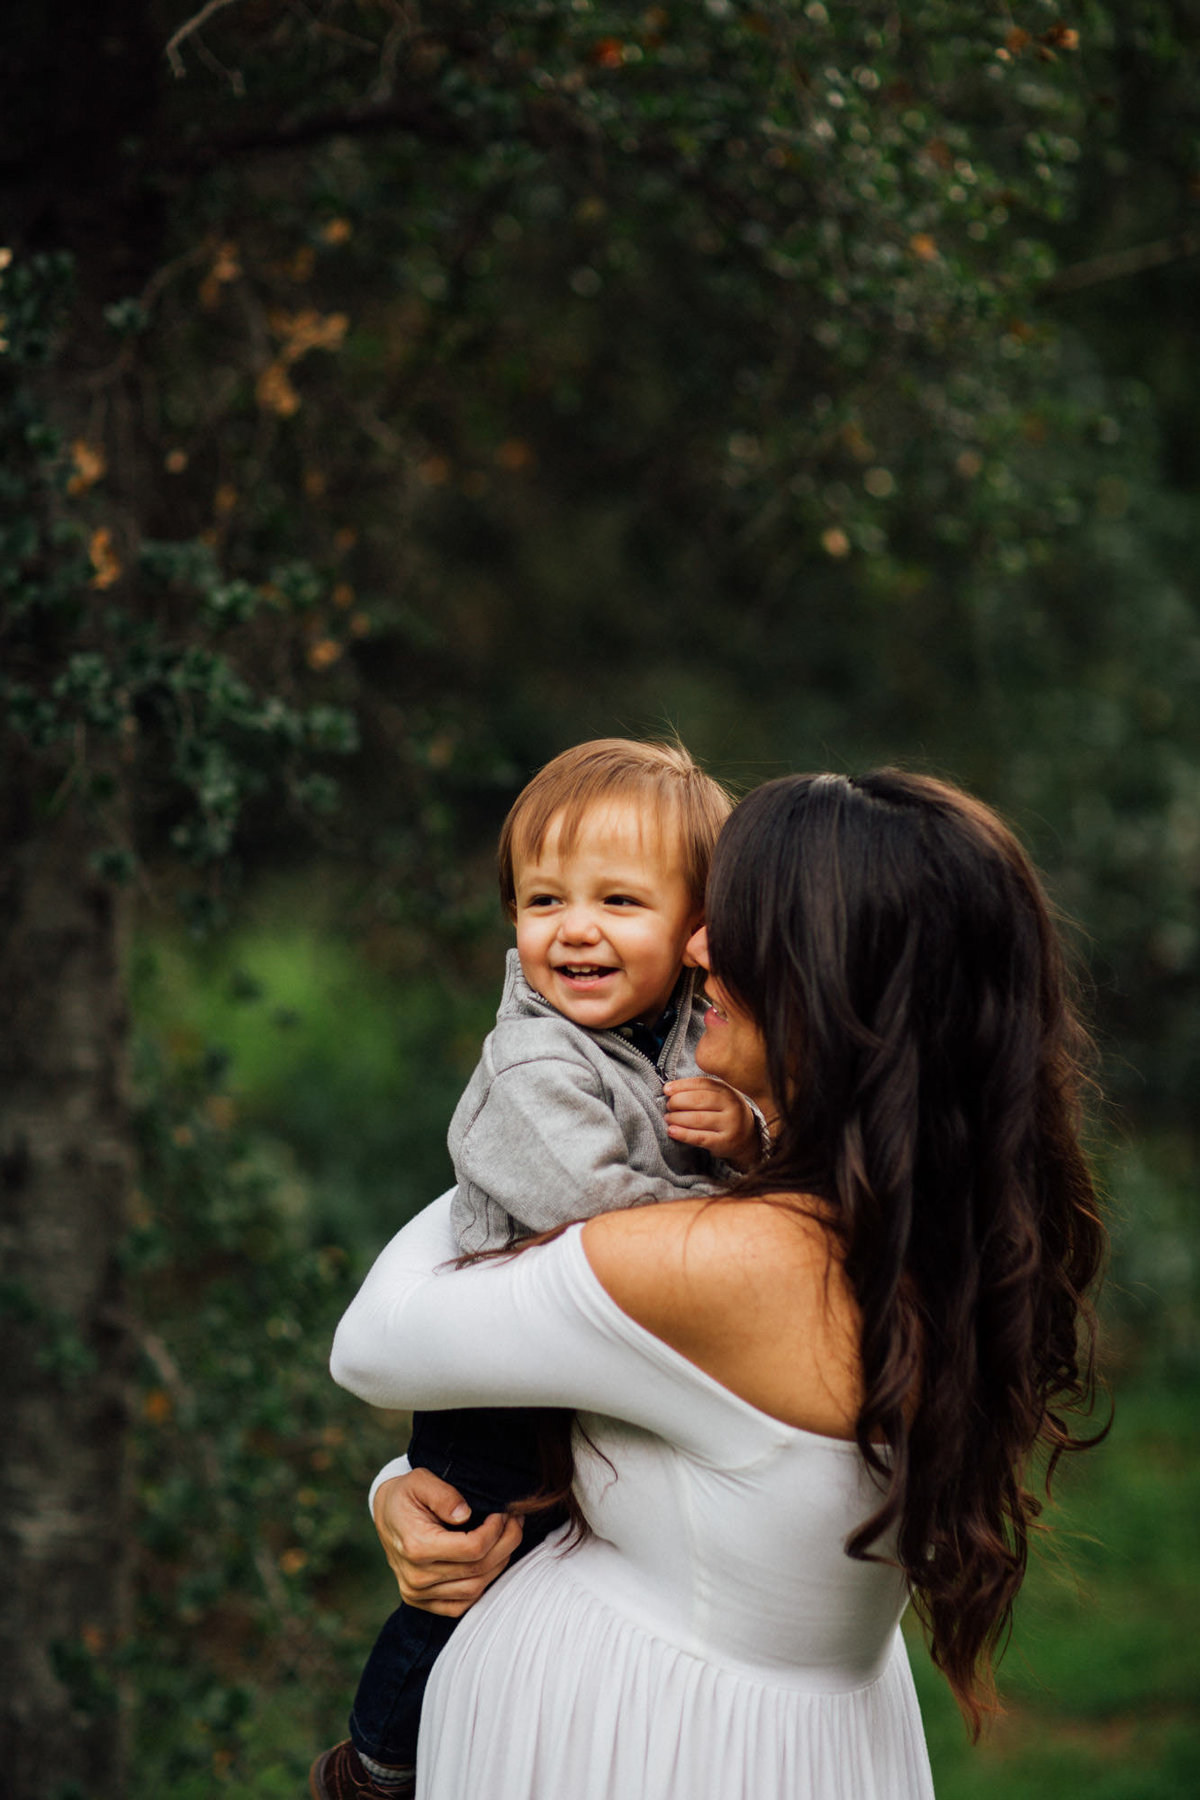 Pregnant mom lifts up her other child during a maternity session